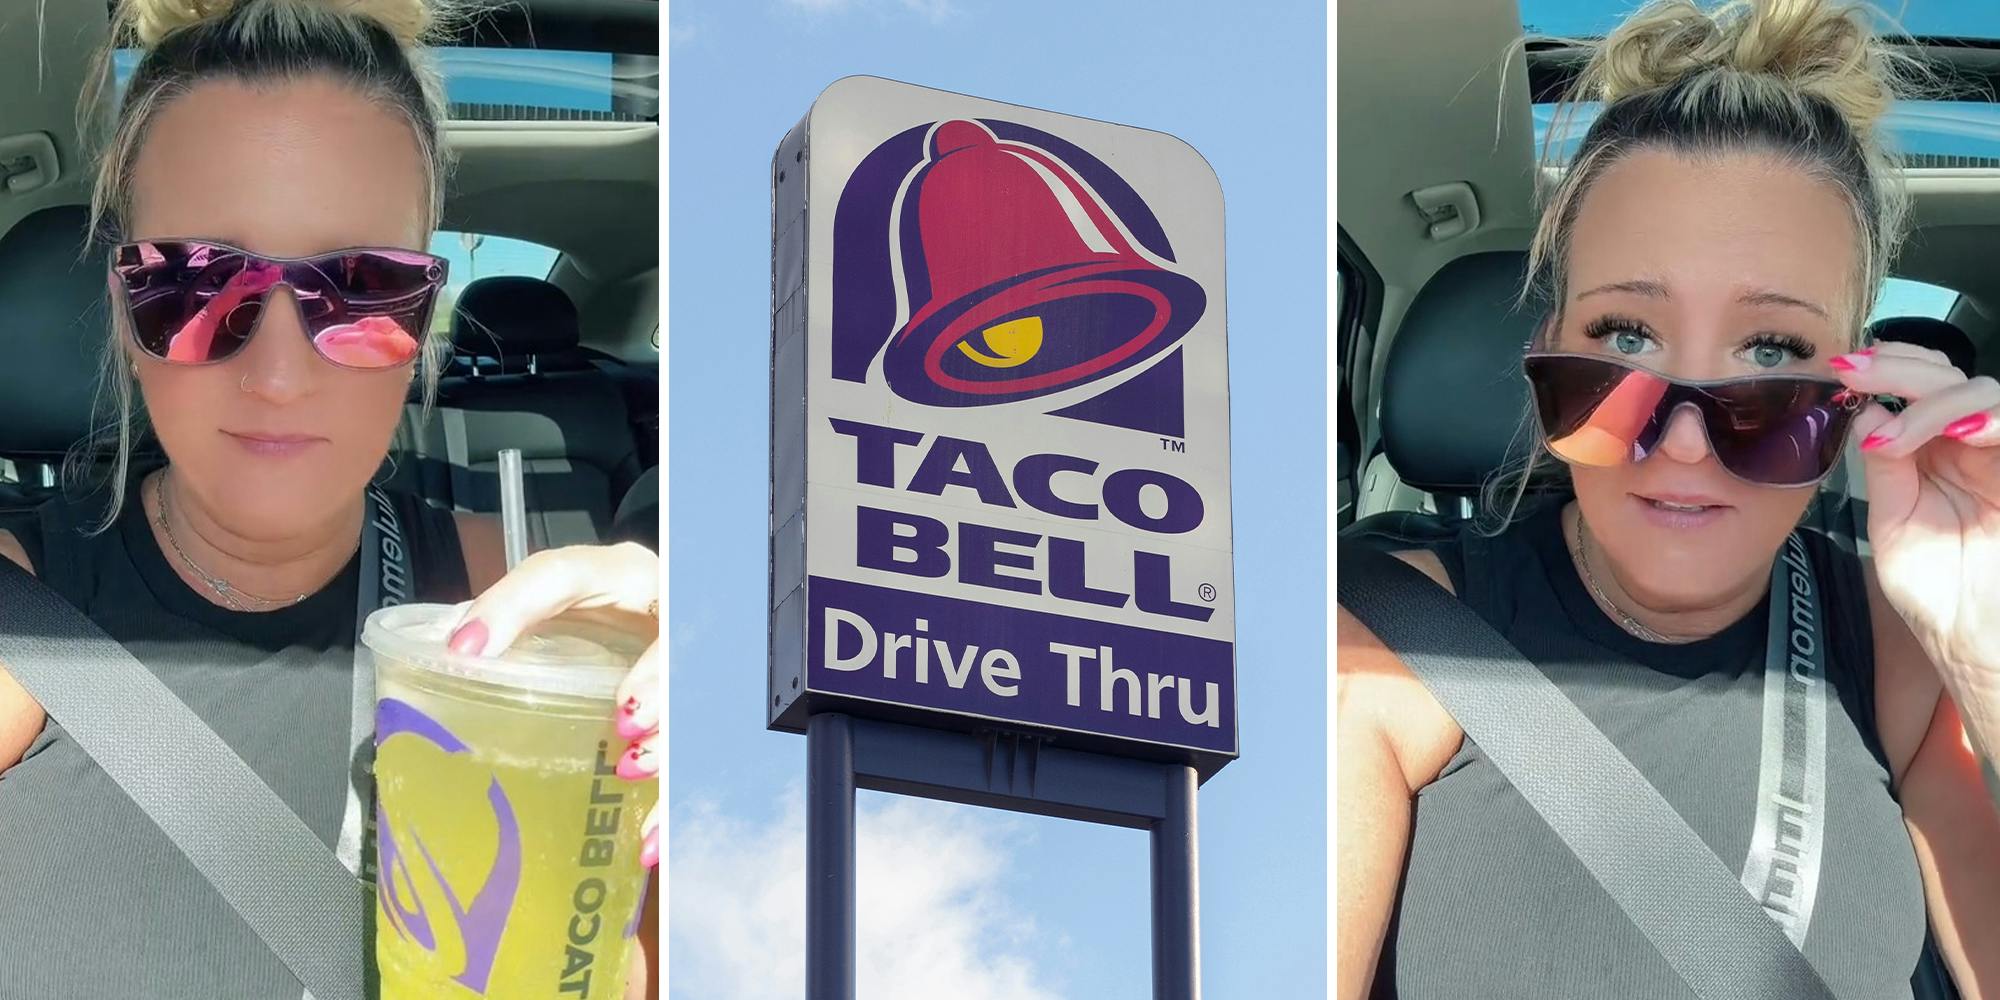 Taco Bell drive-thru customer can’t believe $51 price tag on meal for 2